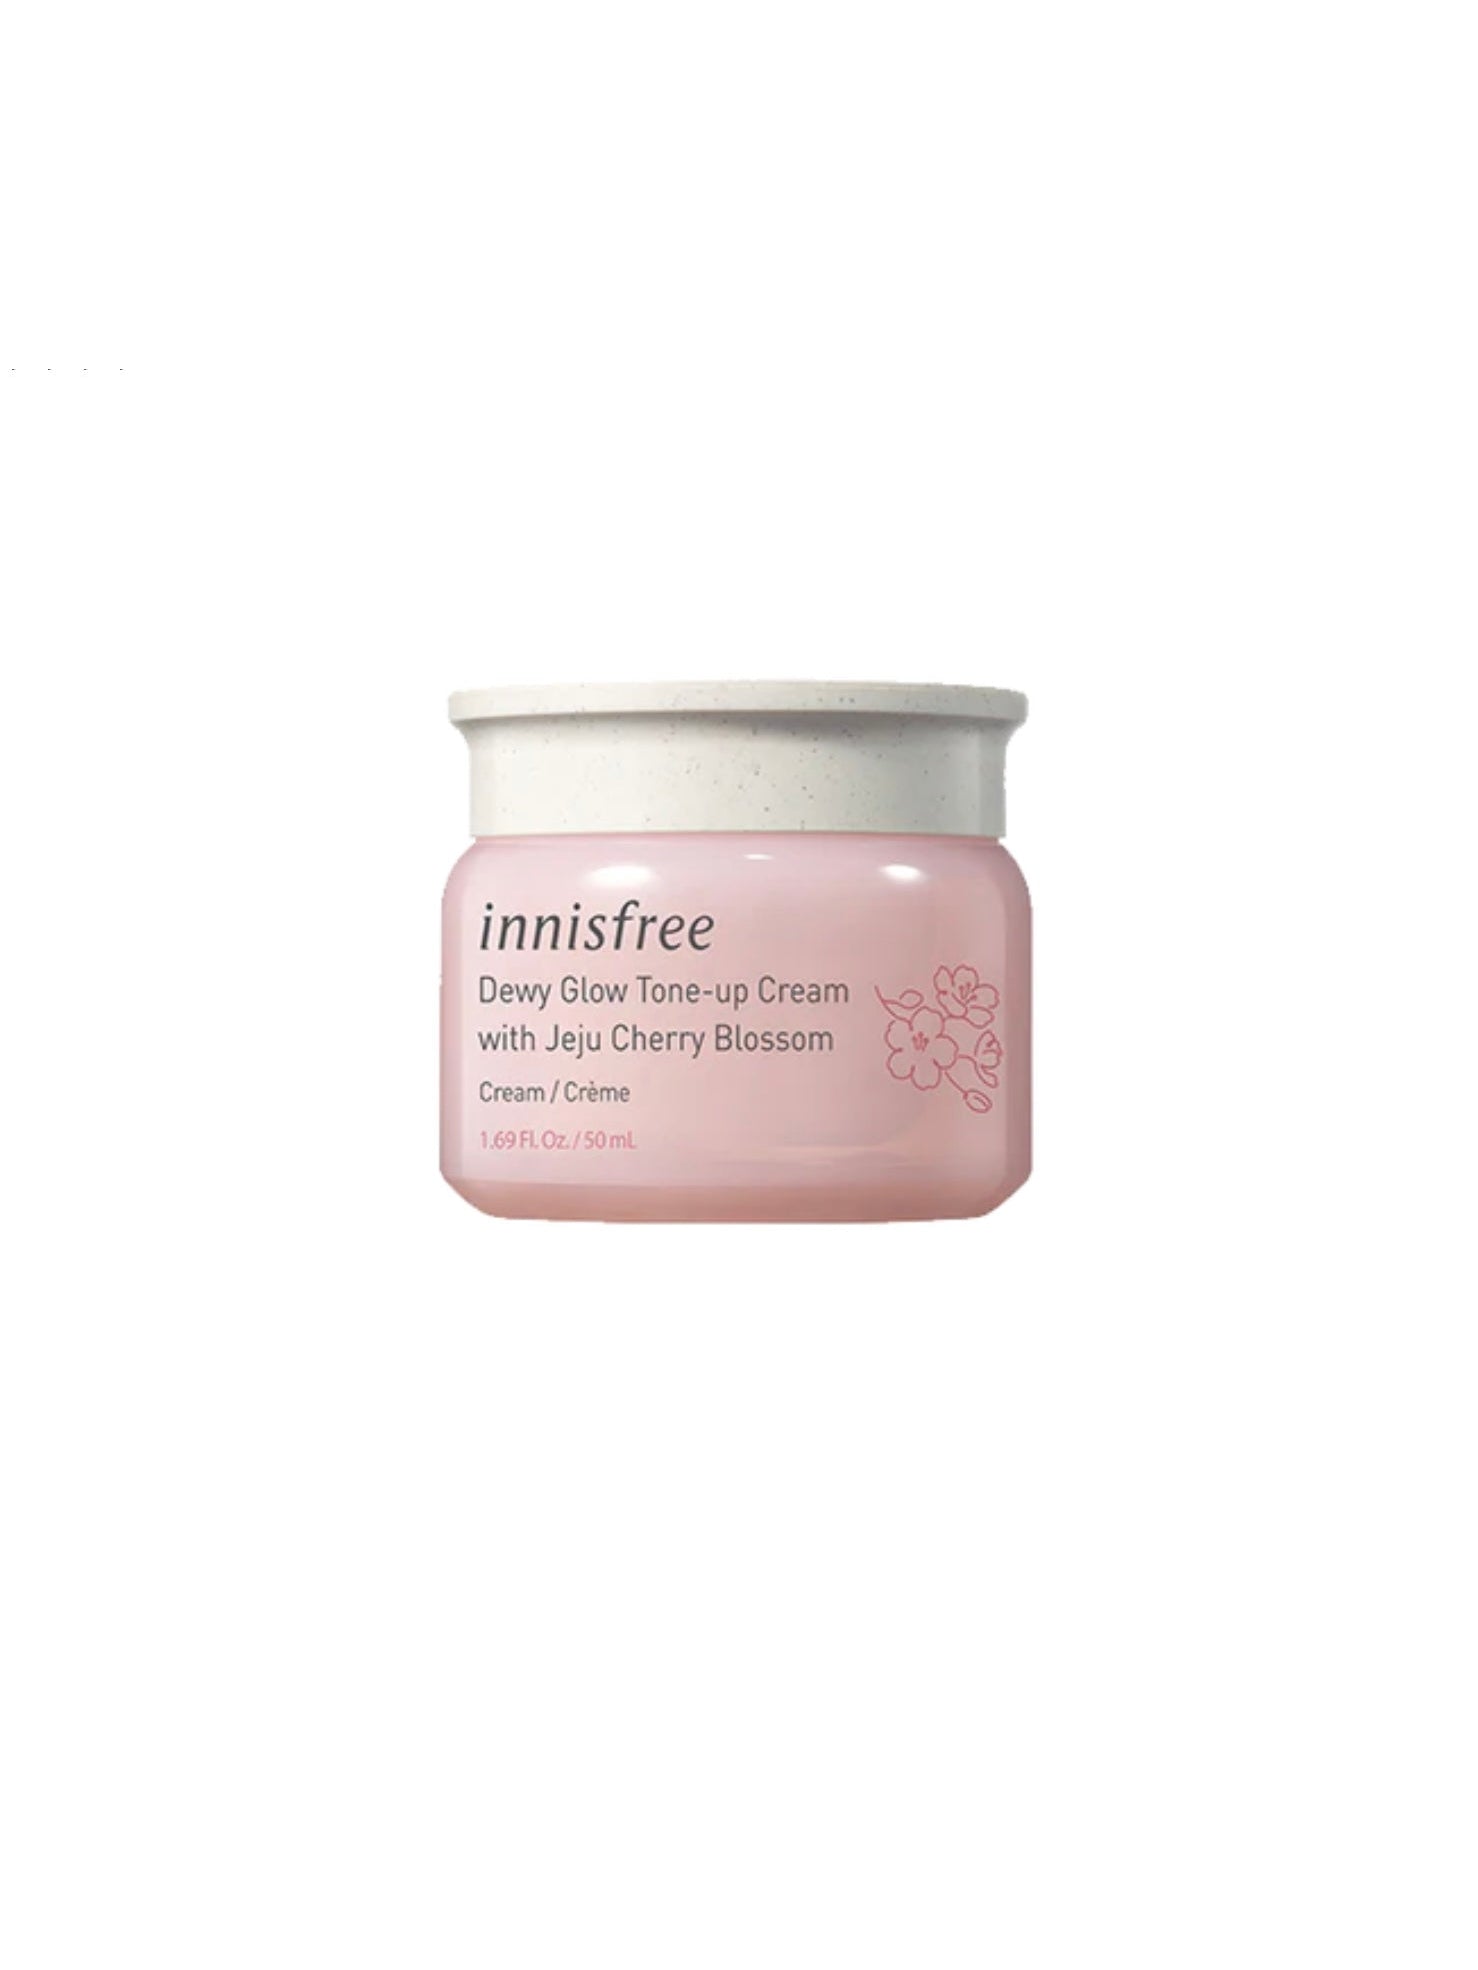 Innisfree Dewy Glow Tone-up Cream with Jeju Cherry Blossom | Song of Skin